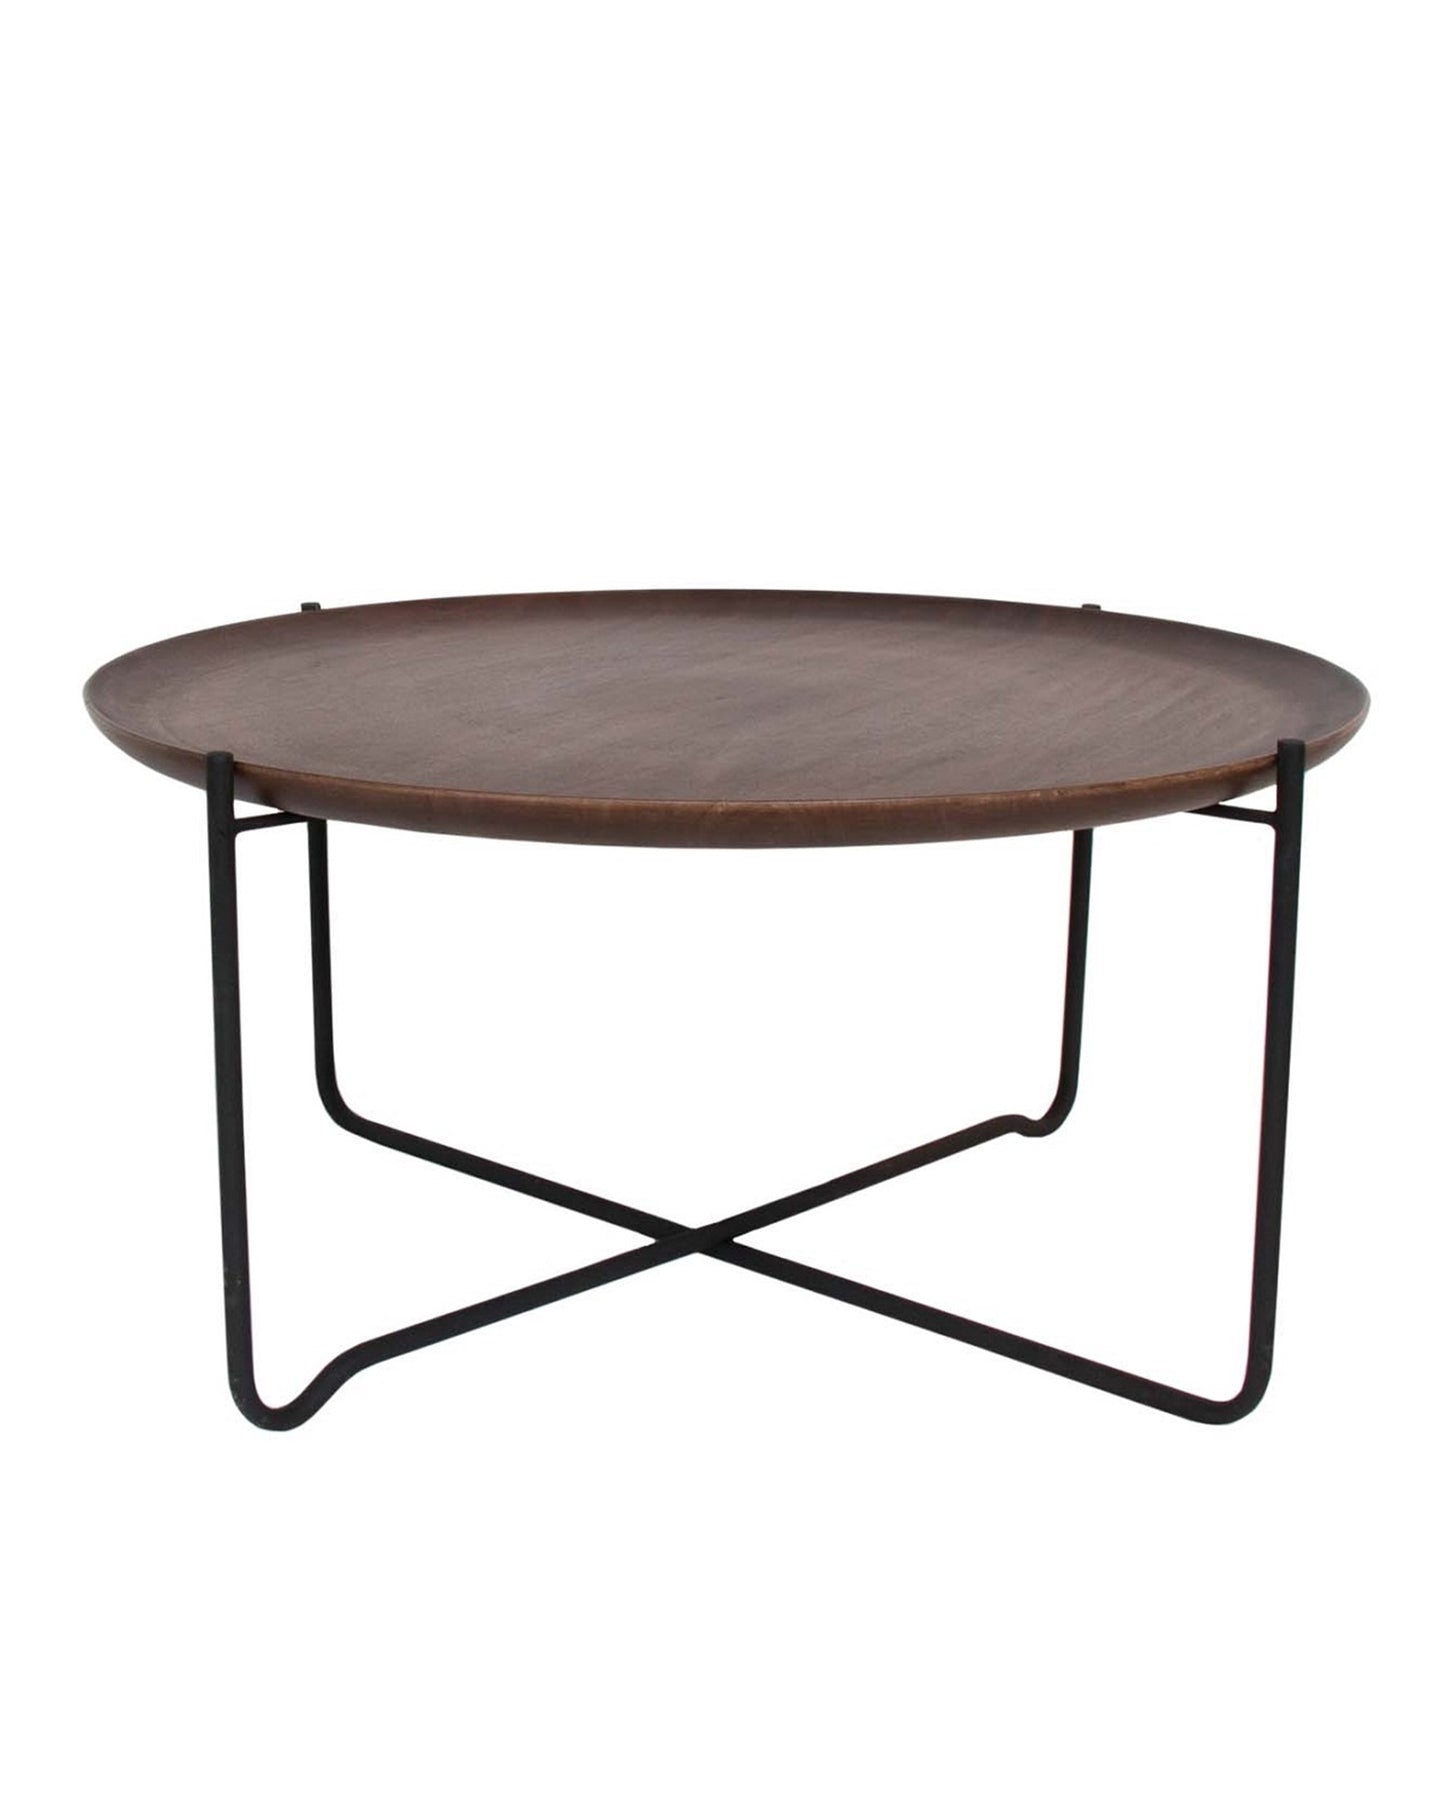 Fez Coffee Table with Tray